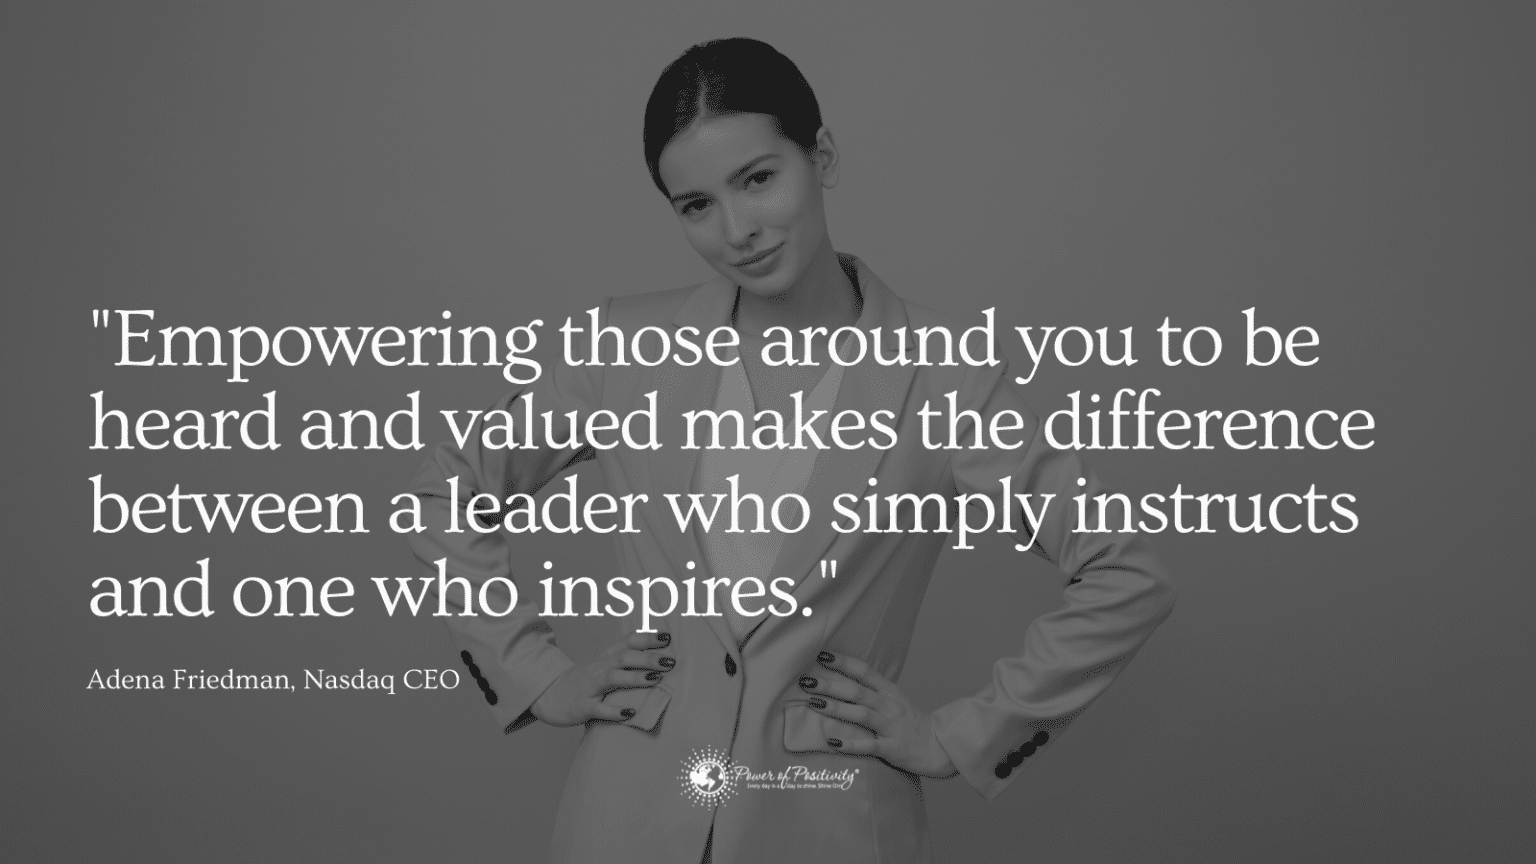 31 Motivational Leadership Quotes By Women